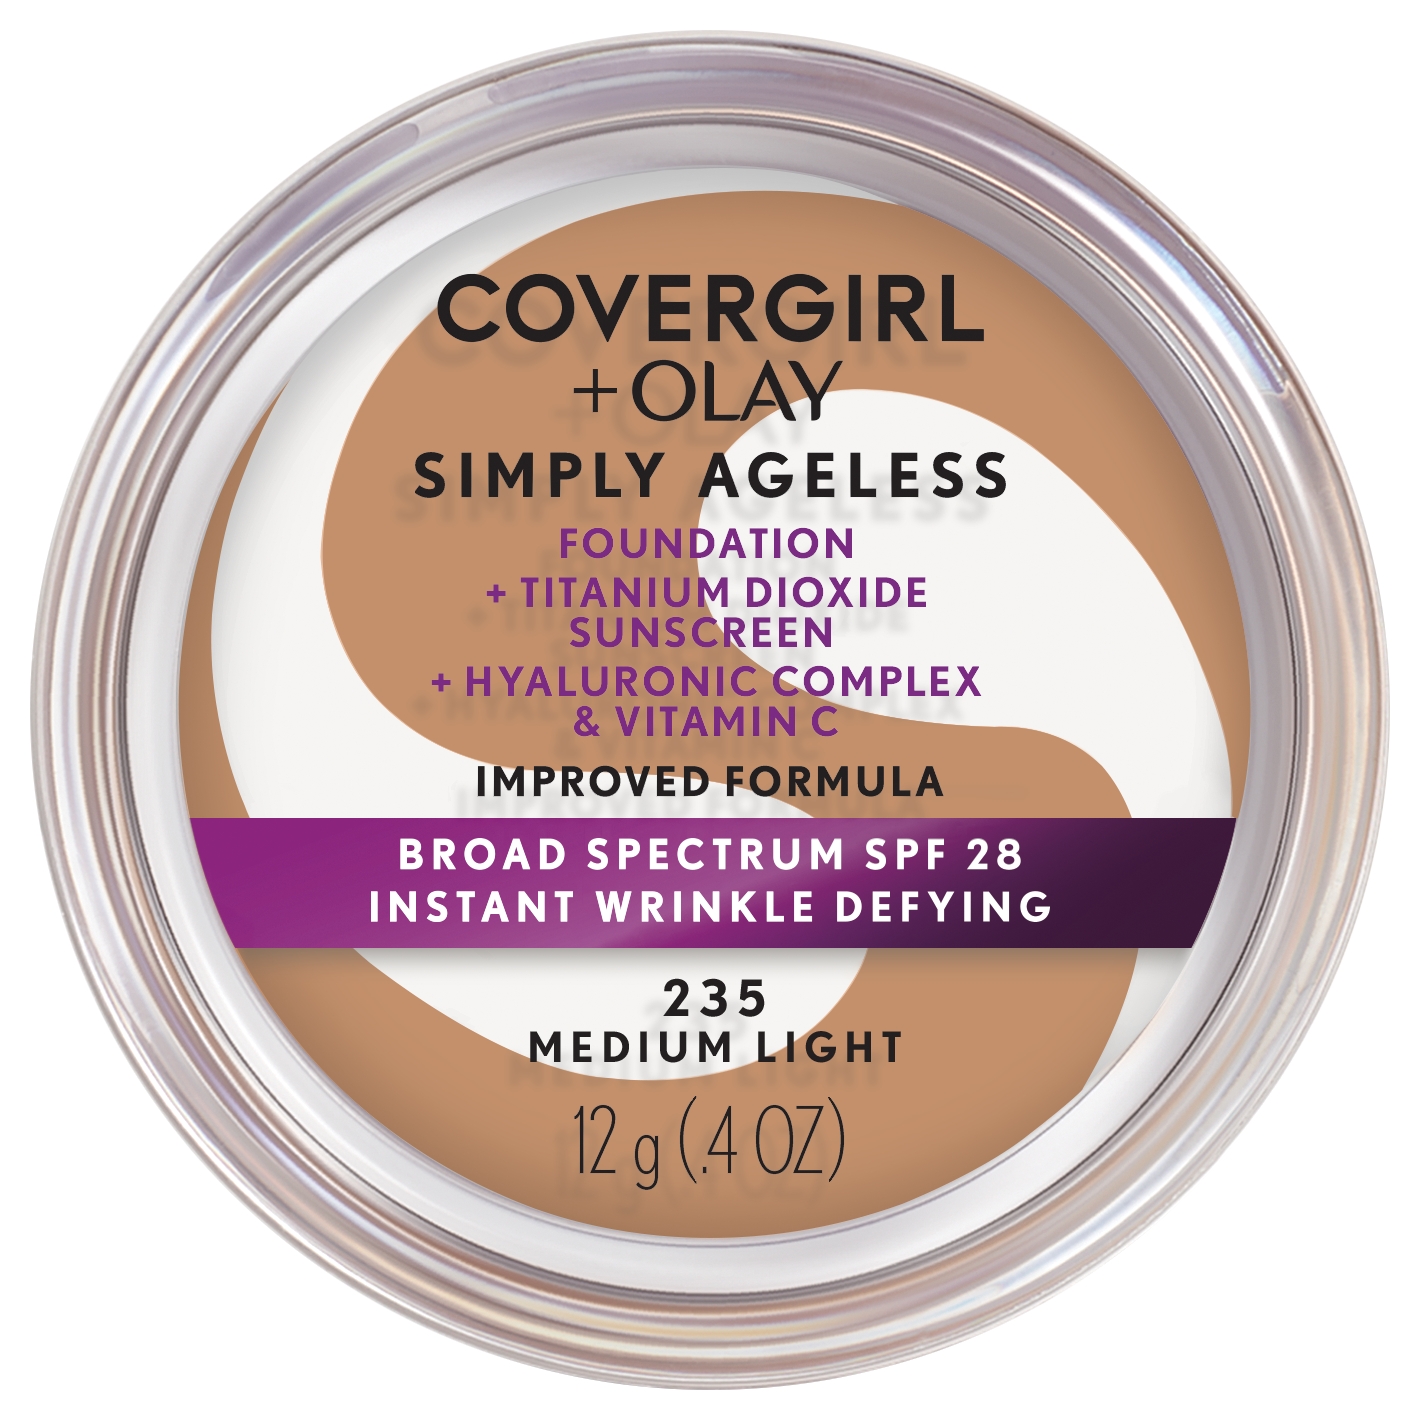 COVERGIRL + OLAY Simply Ageless Instant Wrinkle-Defying Foundation with SPF 28, Medium Light, 0.44 oz - image 1 of 9